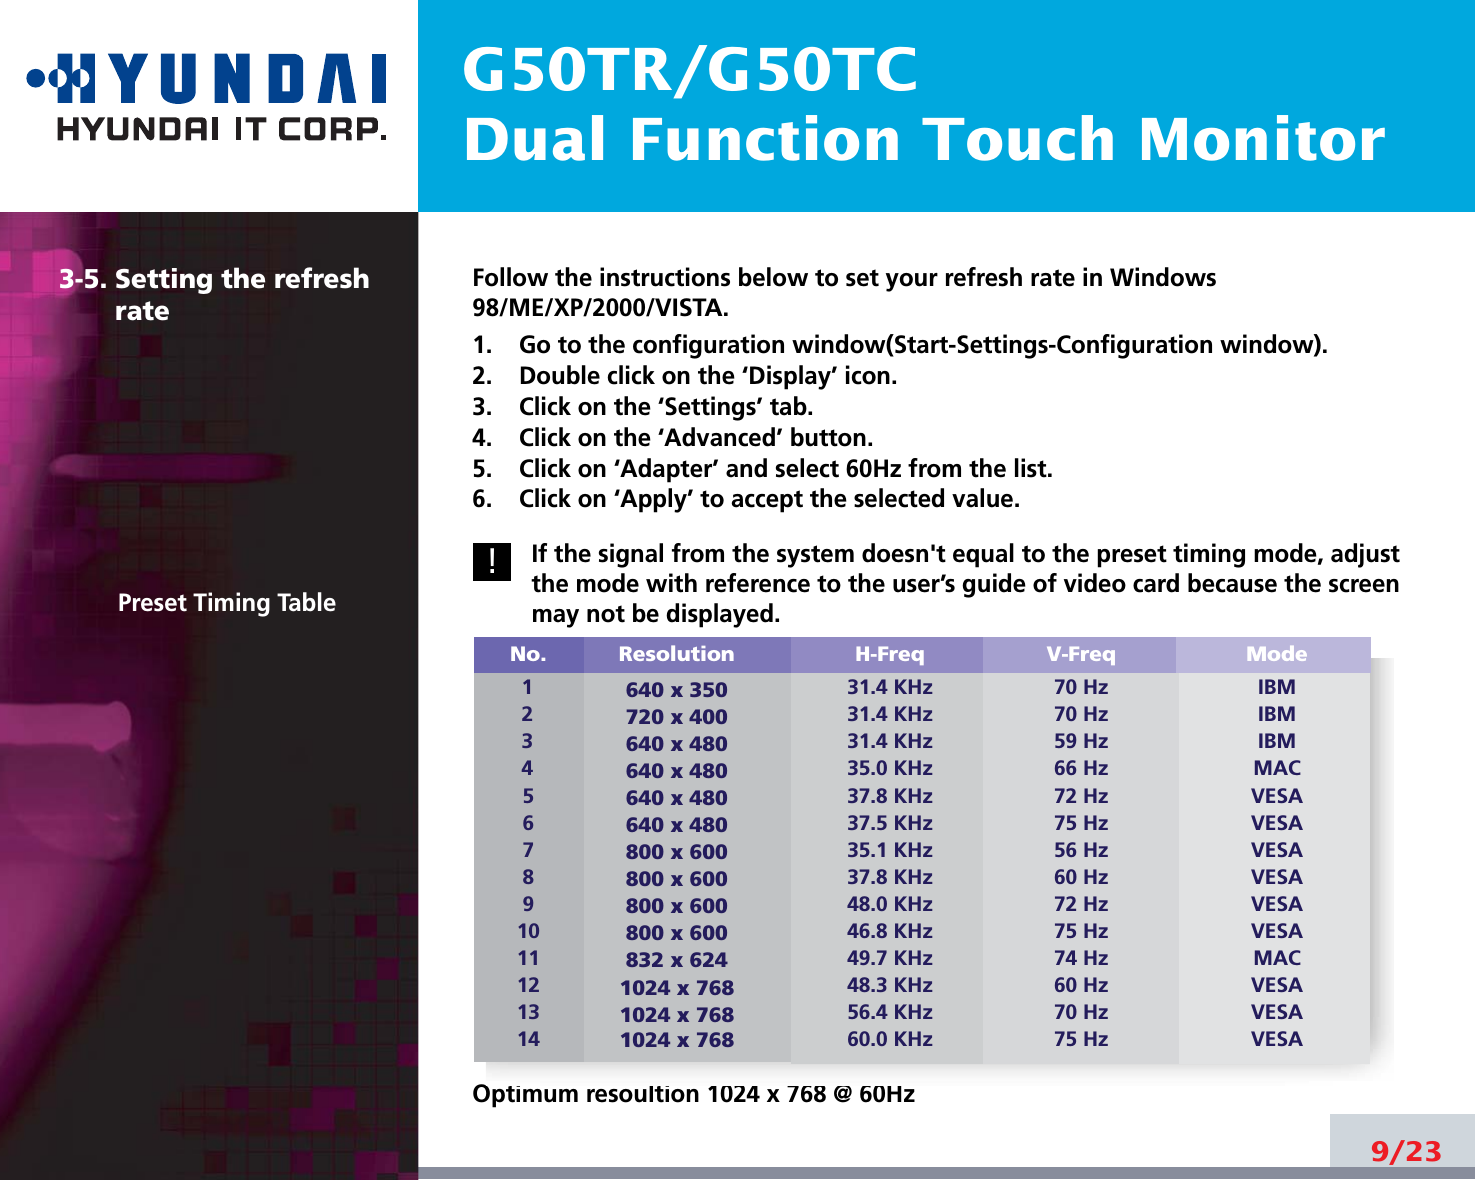 G50TR/G50TCDual Function Touch Monitor9/233-5. Setting the refreshratePreset Timing TableFollow the instructions below to set your refresh rate in Windows98/ME/XP/2000/VISTA.1.    Go to the configuration window(Start-Settings-Configuration window).2.    Double click on the ‘Display’ icon.3.    Click on the ‘Settings’ tab.4.    Click on the ‘Advanced’ button.5.    Click on ‘Adapter’ and select 60Hz from the list.6.    Click on ‘Apply’ to accept the selected value.If the signal from the system doesn&apos;t equal to the preset timing mode, adjustthe mode with reference to the user’s guide of video card because the screenmay not be displayed.Optimum resoultion 1024 x 768 @ 60Hz !No.1234567891011121314Resolution640 x 350720 x 400640 x 480640 x 480640 x 480640 x 480800 x 600800 x 600800 x 600800 x 600832 x 6241024 x 7681024 x 7681024 x 768H-Freq31.4 KHz31.4 KHz31.4 KHz35.0 KHz37.8 KHz37.5 KHz35.1 KHz37.8 KHz48.0 KHz46.8 KHz49.7 KHz48.3 KHz56.4 KHz60.0 KHzV-Freq70 Hz70 Hz59 Hz66 Hz72 Hz75 Hz56 Hz60 Hz72 Hz75 Hz74 Hz60 Hz70 Hz75 HzModeIBMIBMIBMMACVESAVESAVESAVESAVESAVESAMACVESAVESAVESA